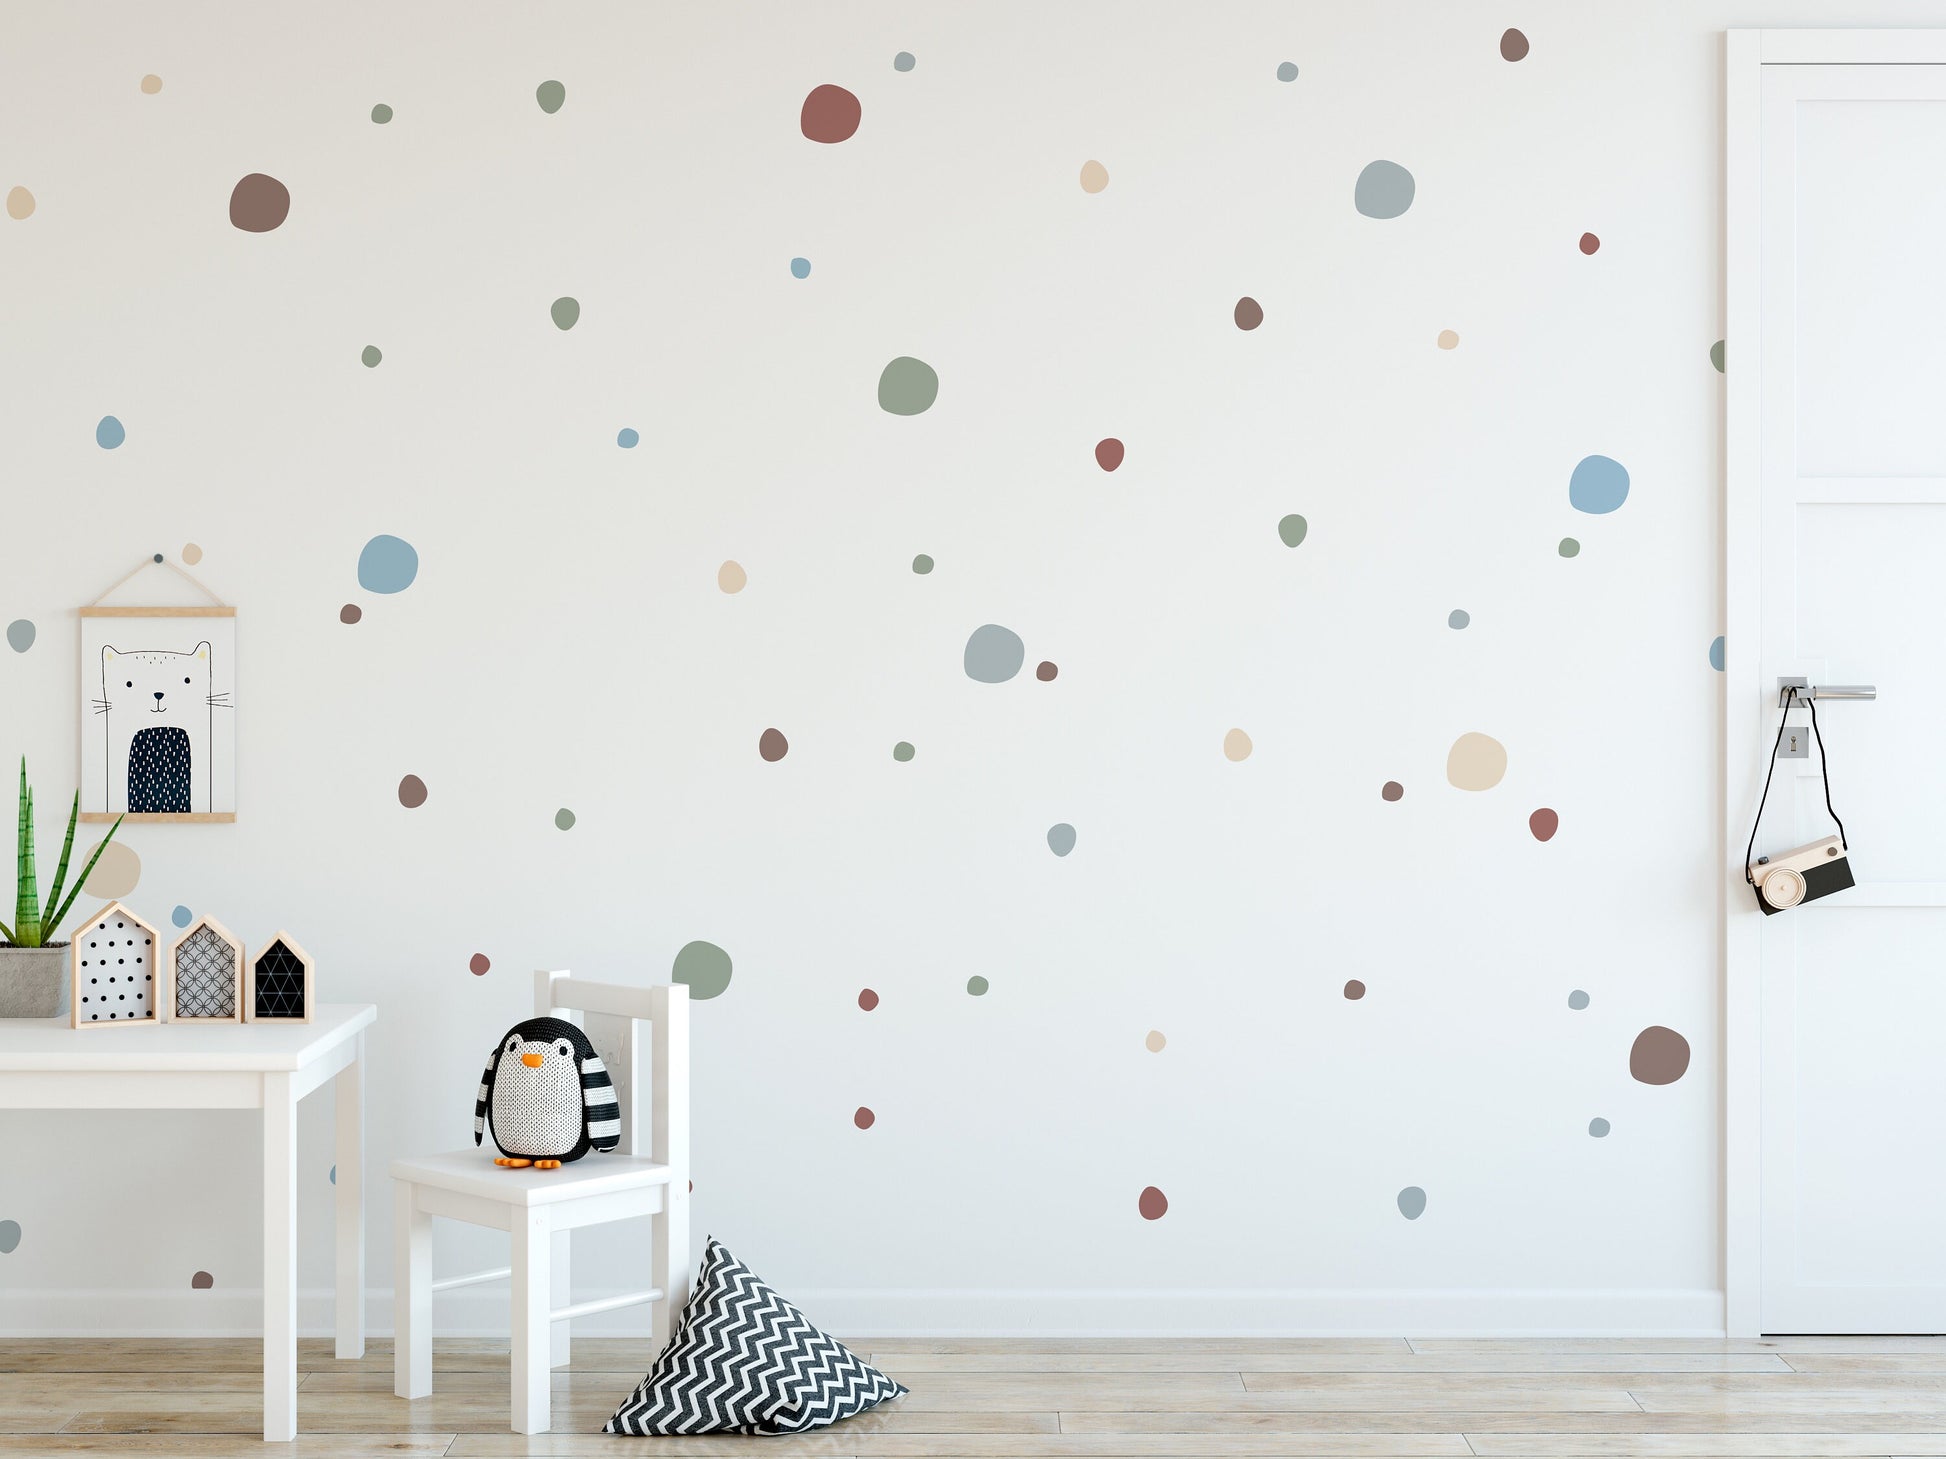 Neutral Tones Earth Colour Polka Dot Wall Decal Stickers, Nursery Wall Stickers, Kids Wall Art, Childrens Decor